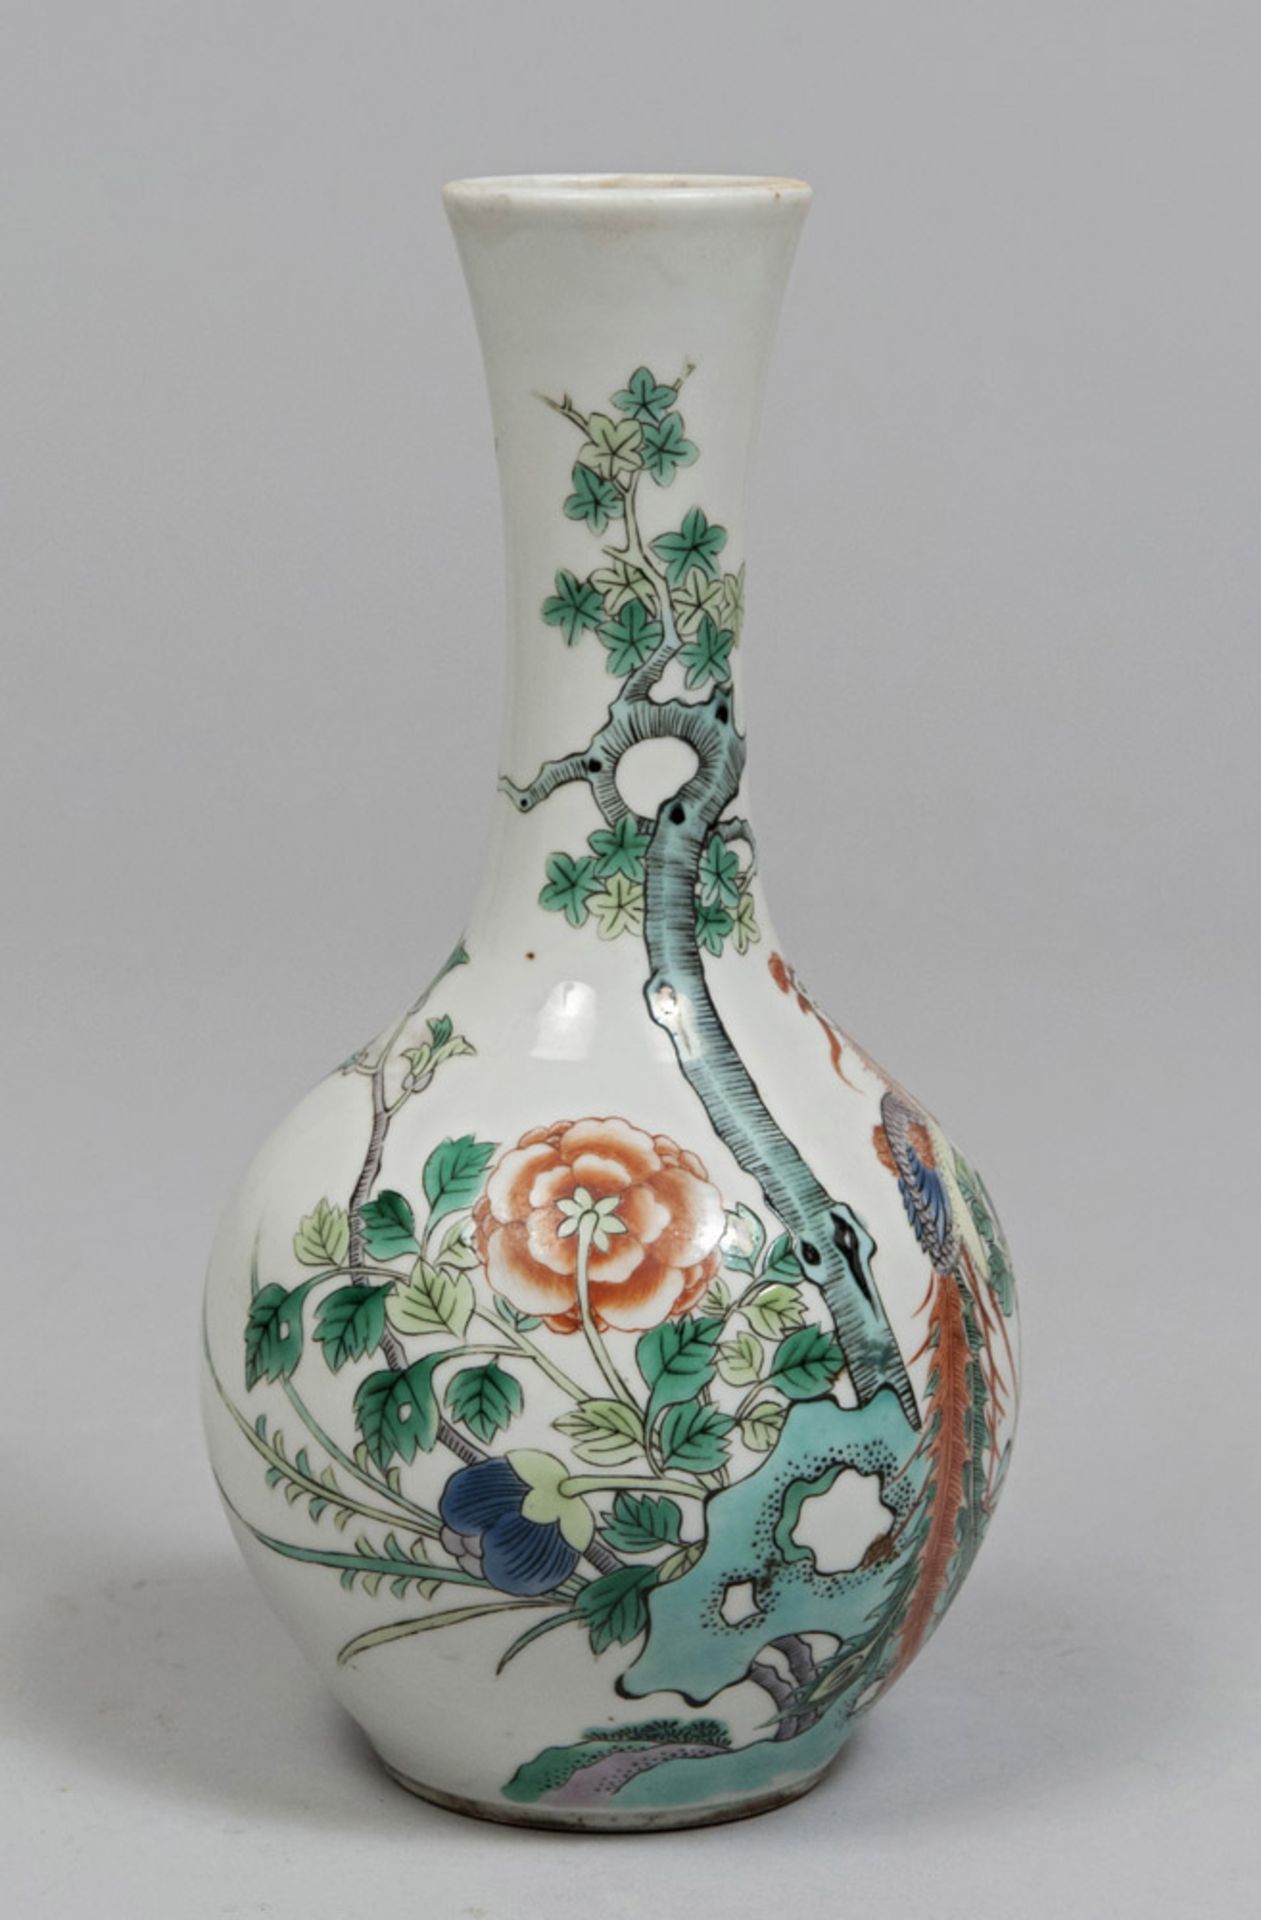 A CHINESE POLYCHROME PORCELAIN VASE, 20TH CENTURY